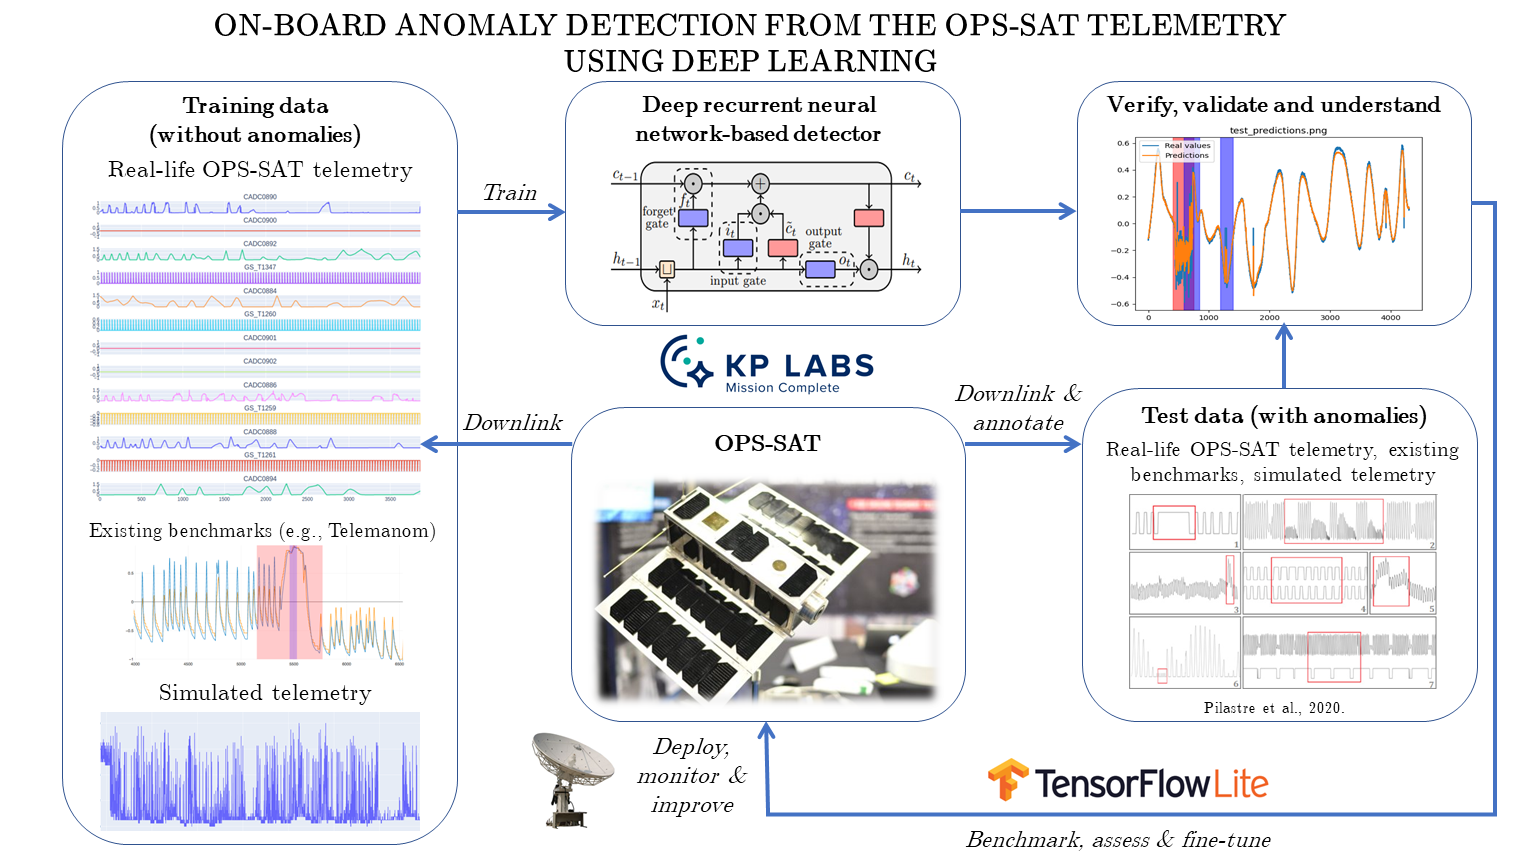 ON-BOARD ANOMALY DETECTION FROM THE OPS-SAT TELEMETRY USING DEEP LEARNING